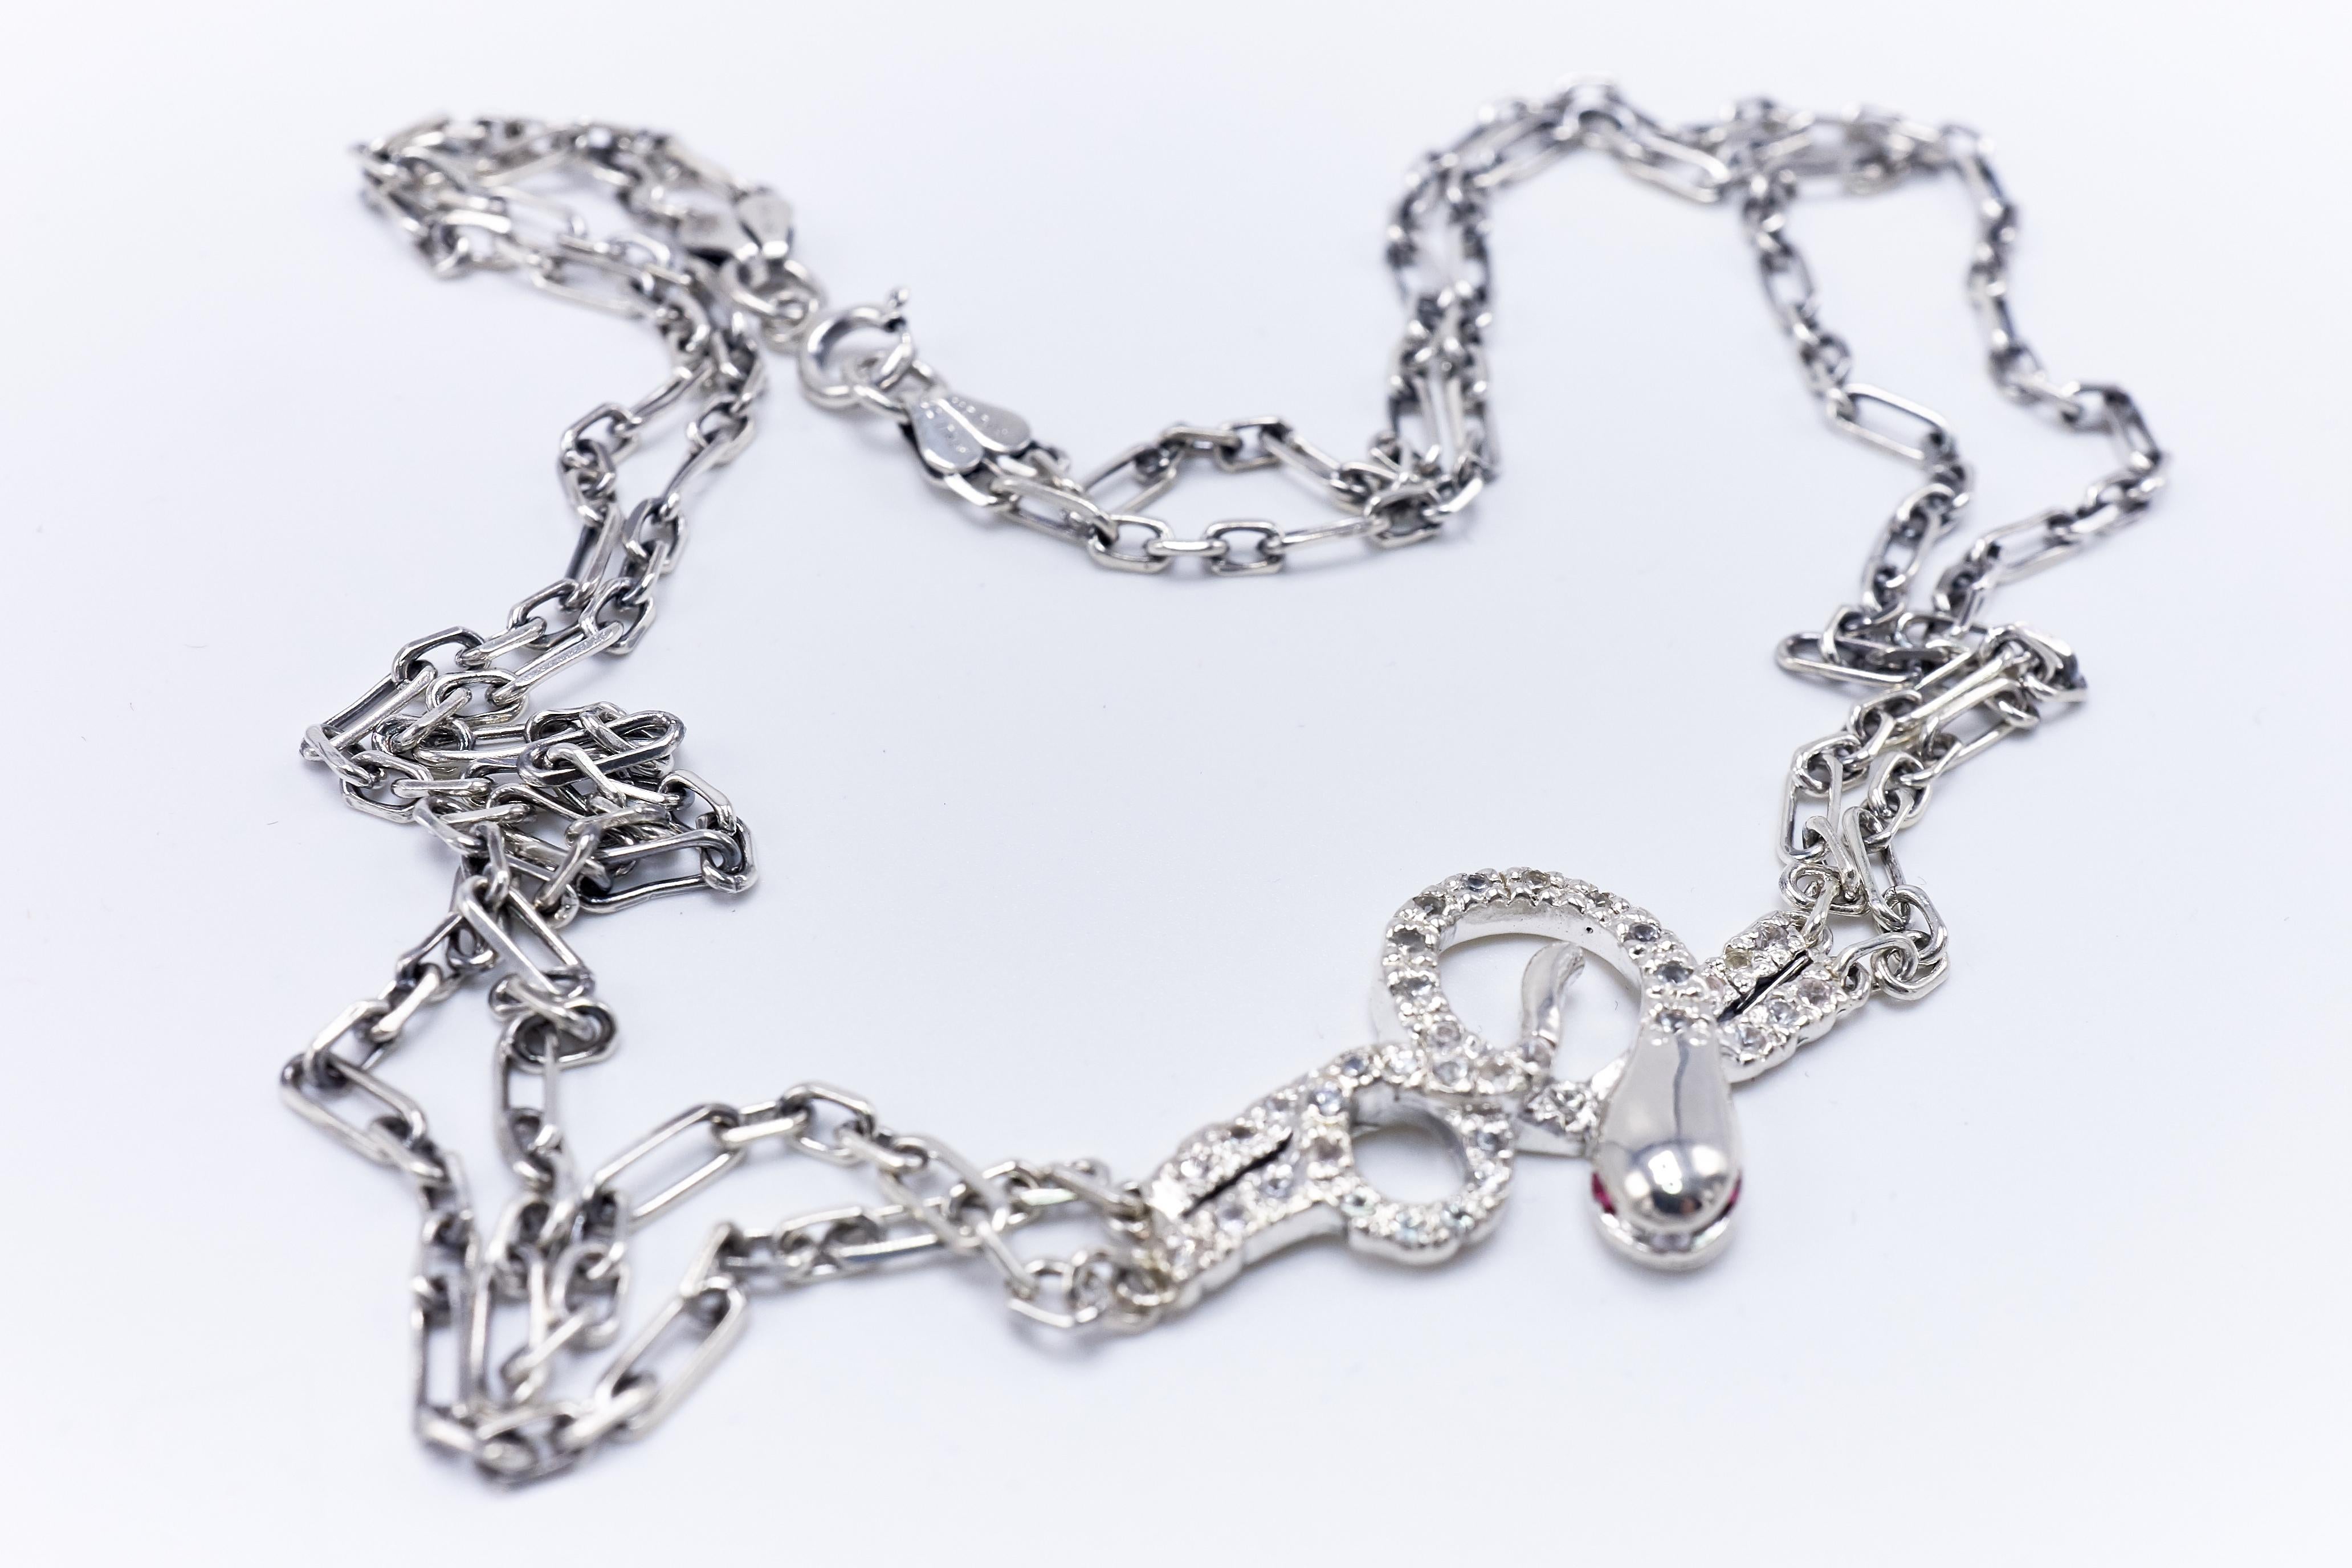 White Sapphire Ruby Eyes Snake Necklace Choker Chain Silver Victorian Style J Dauphin

J Dauphin 'Internal selves